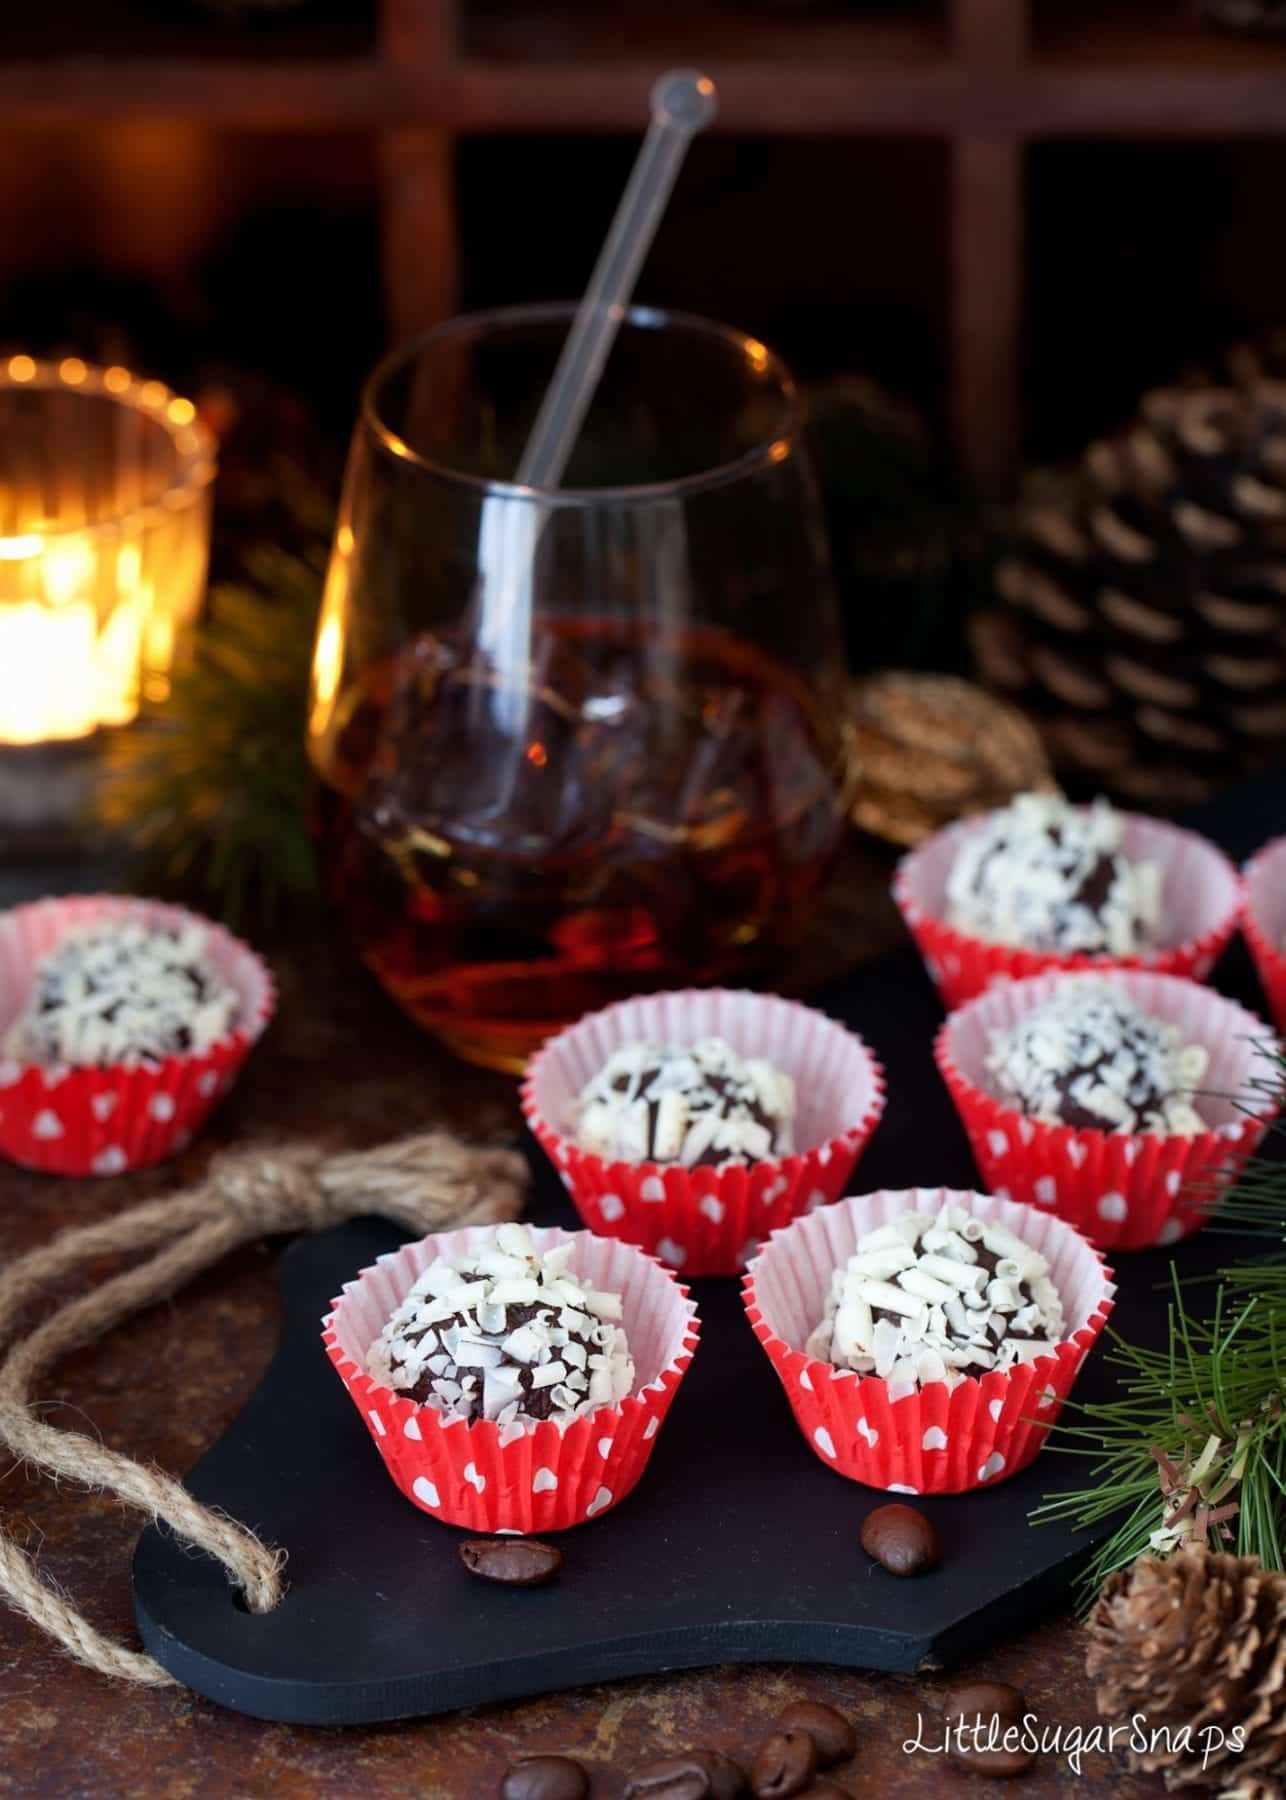 Black Russian Truffles in red paper cases with a black russian cocktail alongside,